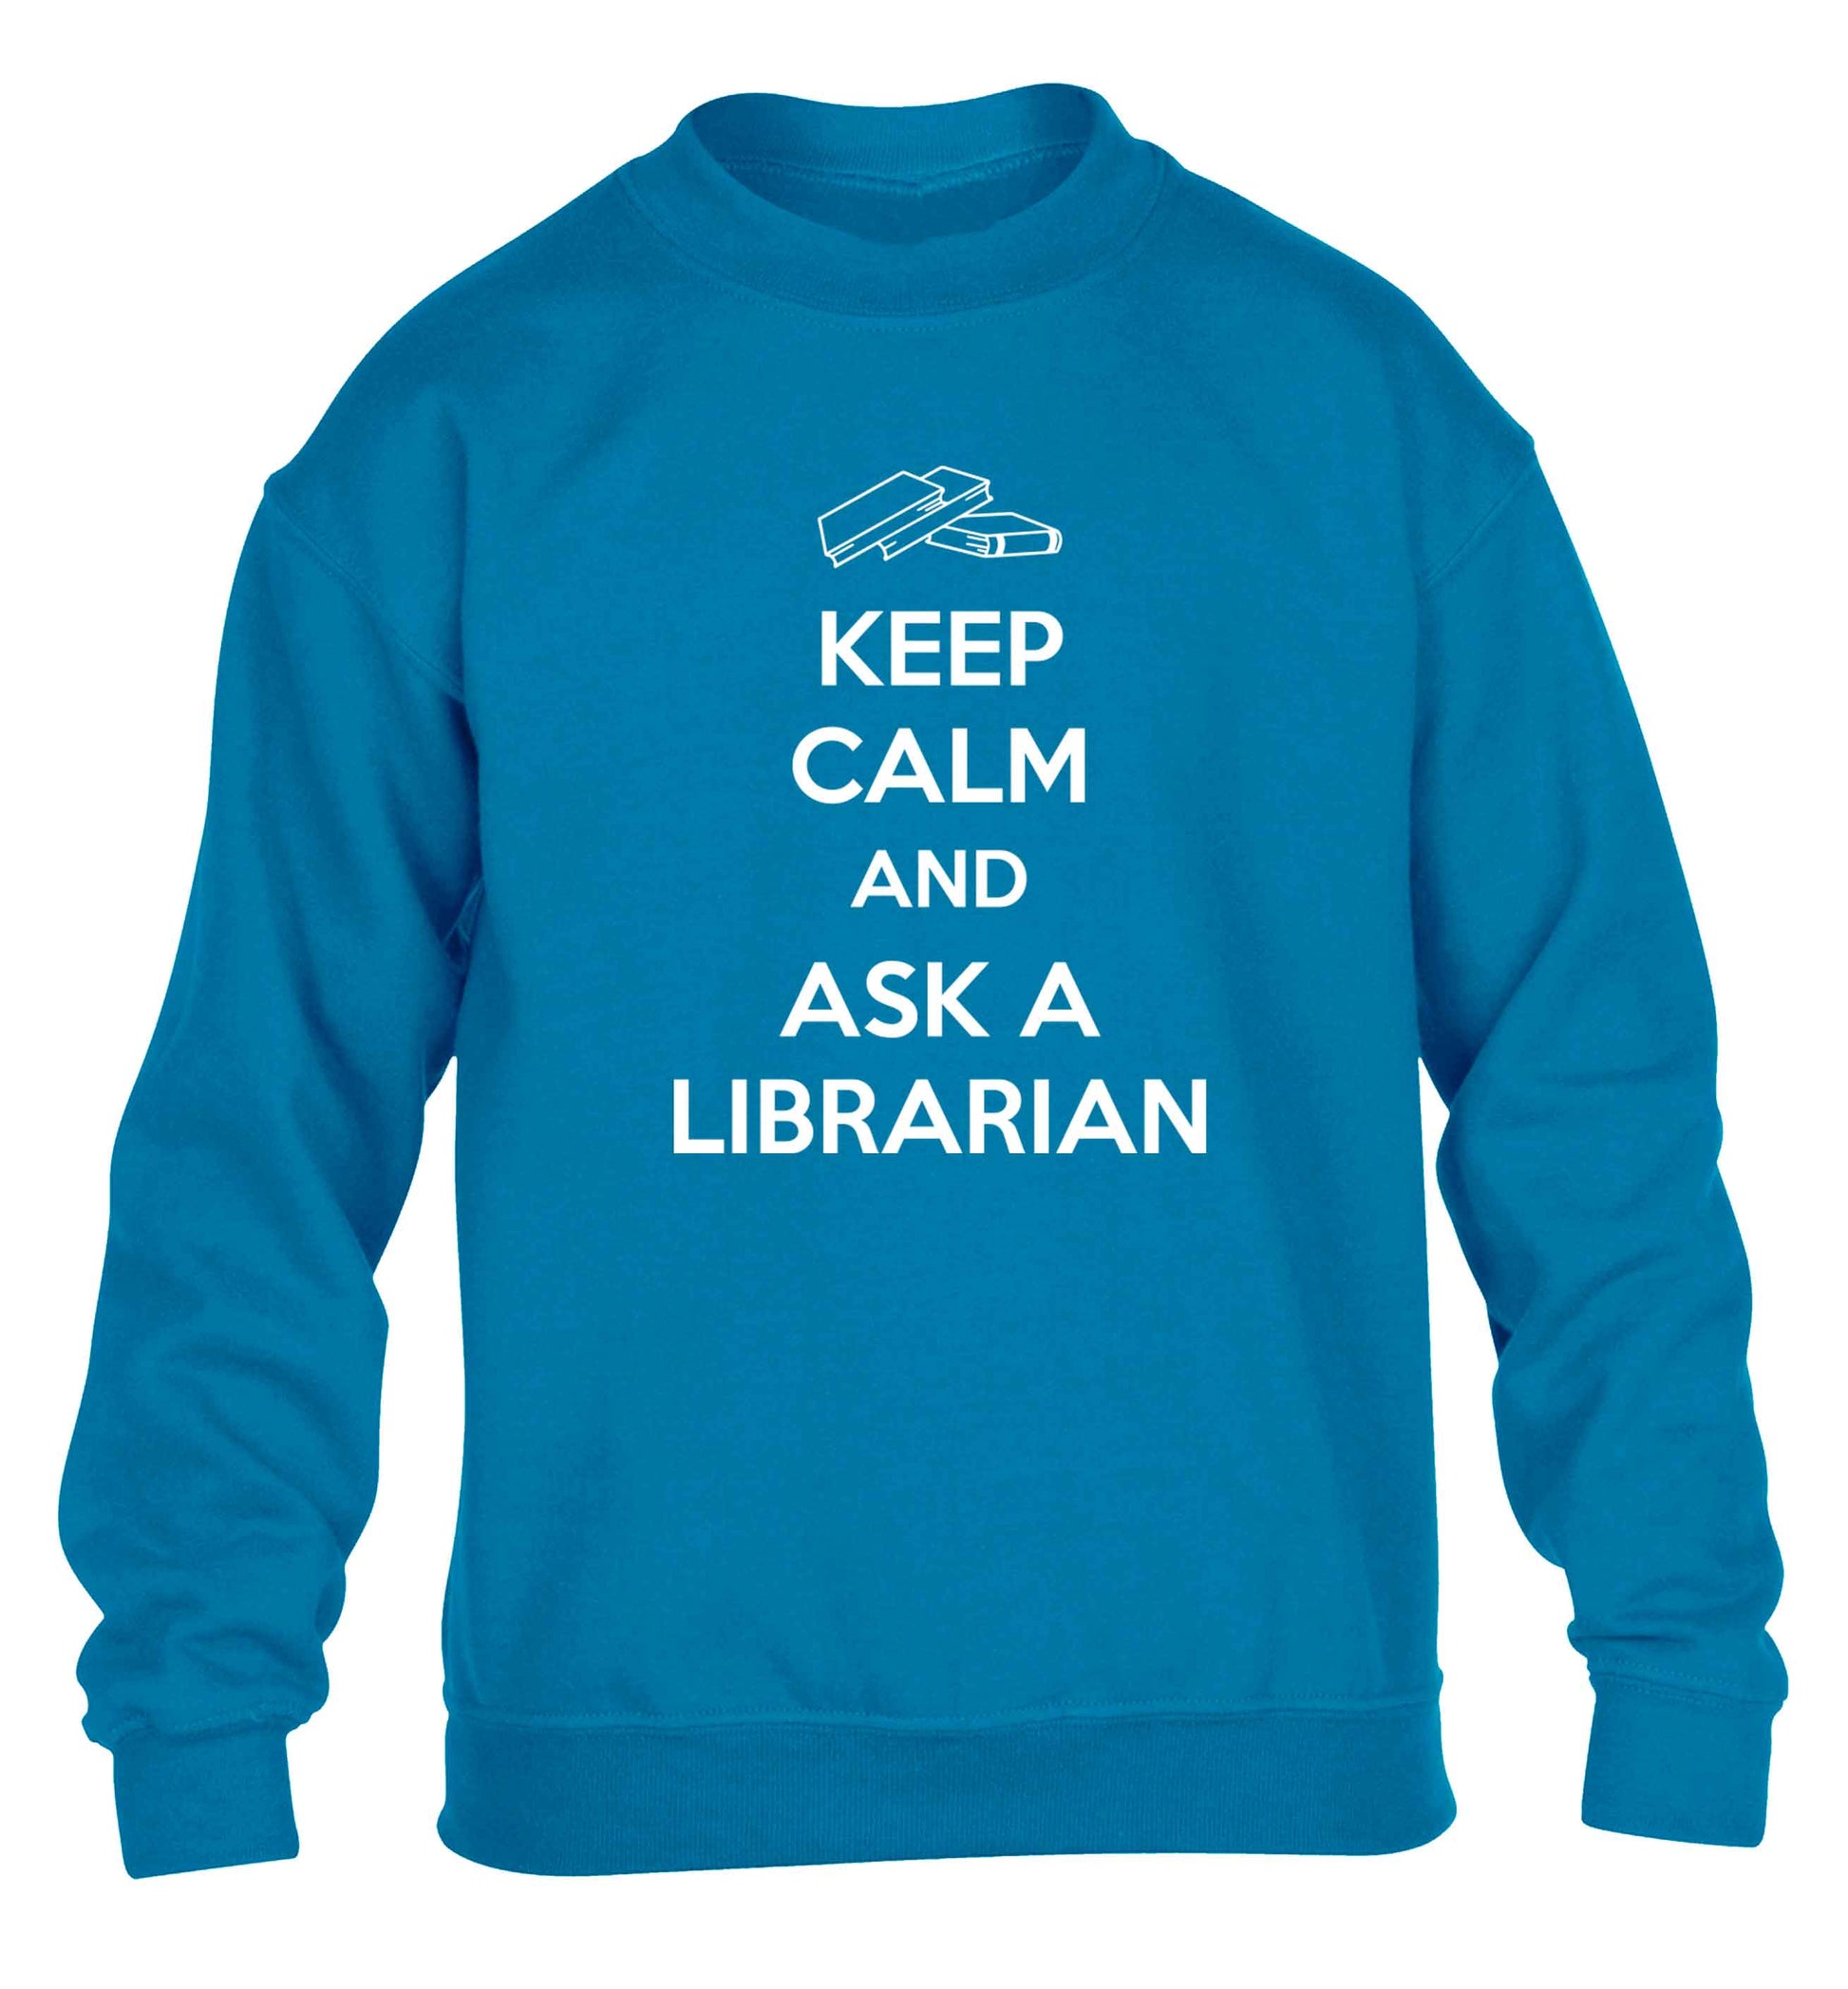 Keep calm and ask a librarian children's blue sweater 12-13 Years